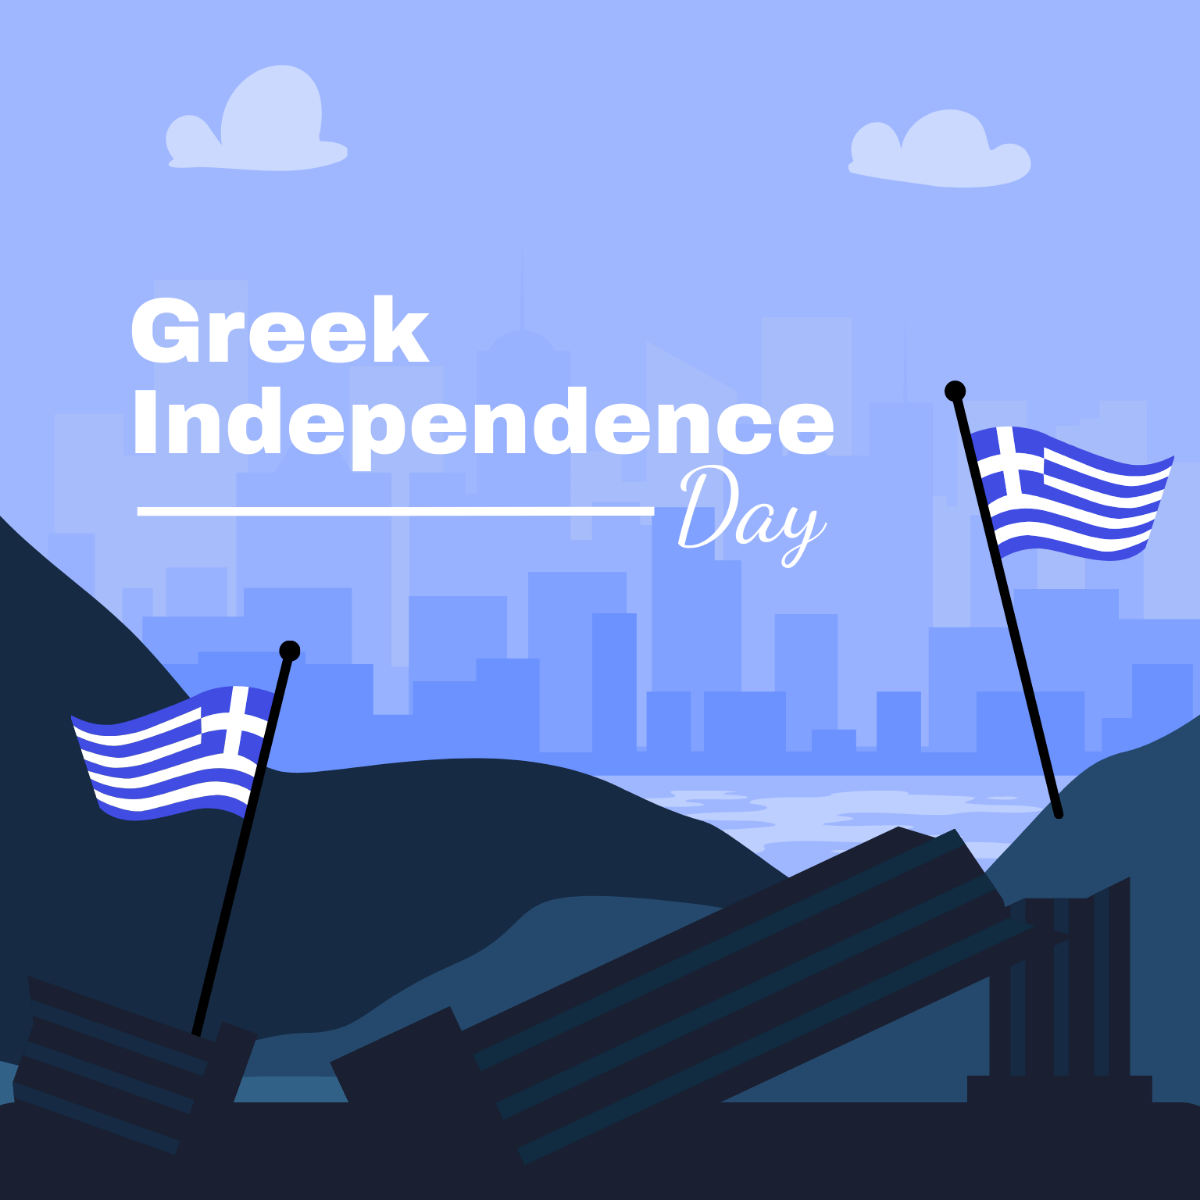 Free Greek Independence Day Illustration Template